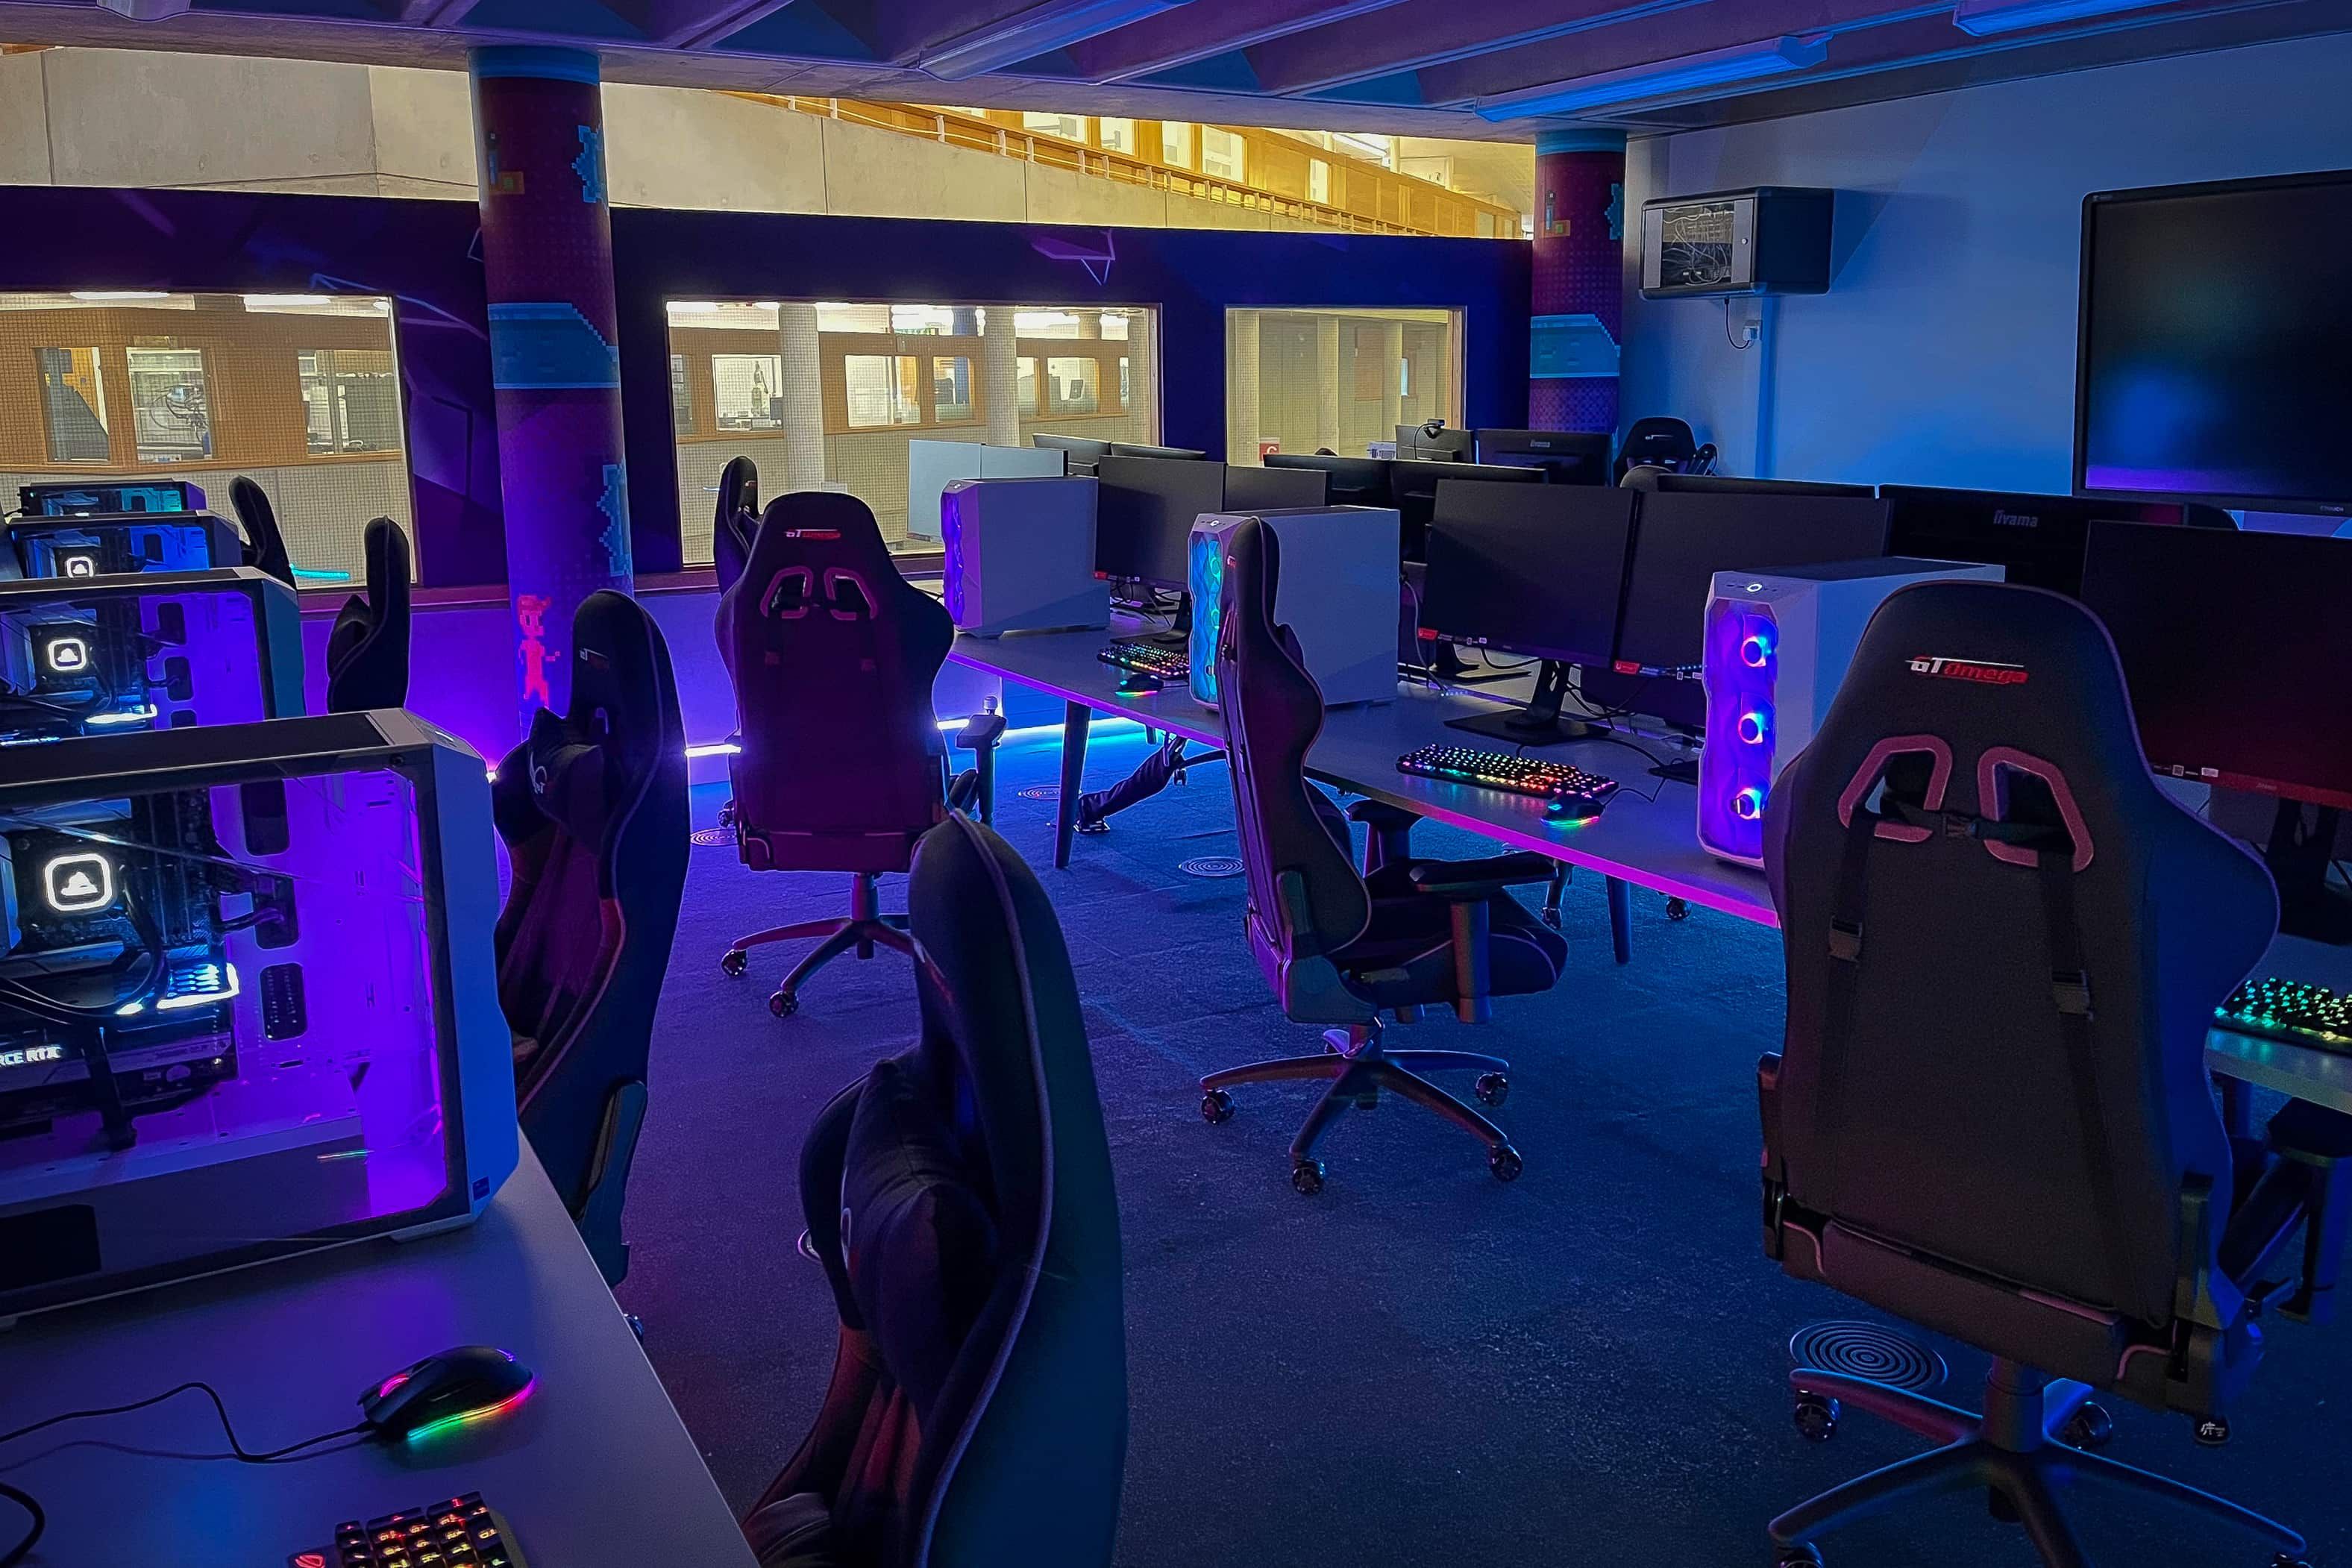 Gaming chairs and computing equipment